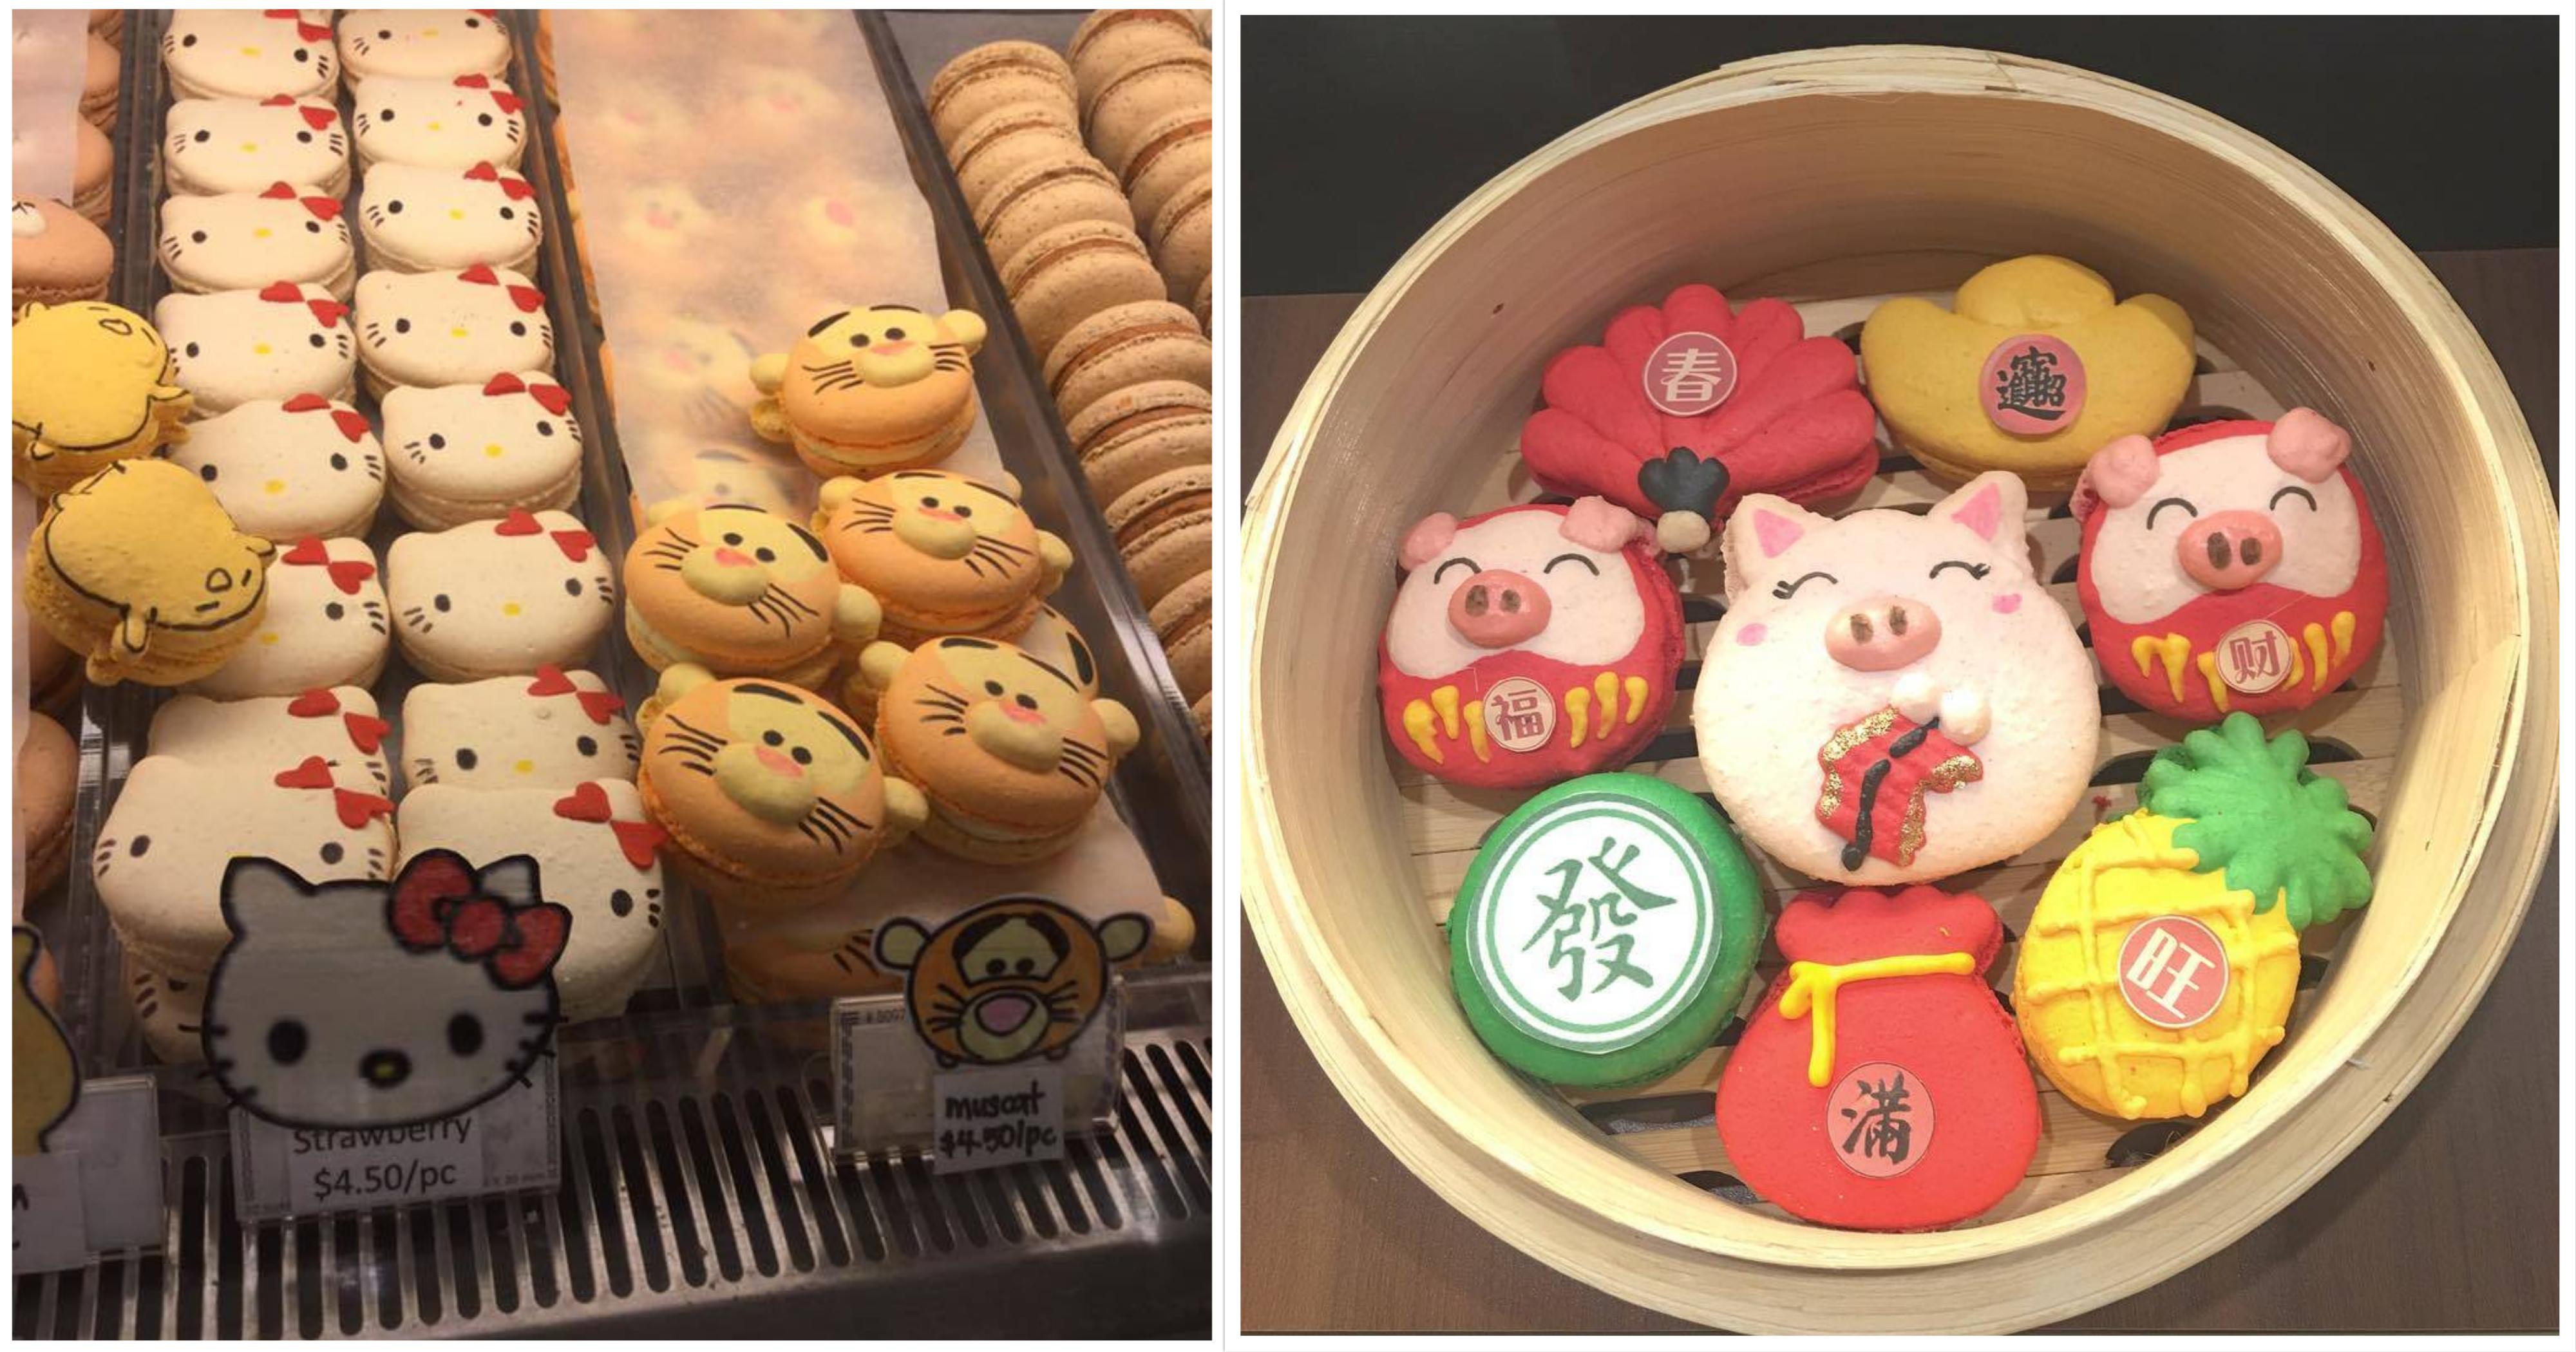 Bakery at Raffles City sells adorable macarons of your favourite cartoon  characters  - News from Singapore, Asia and around the world